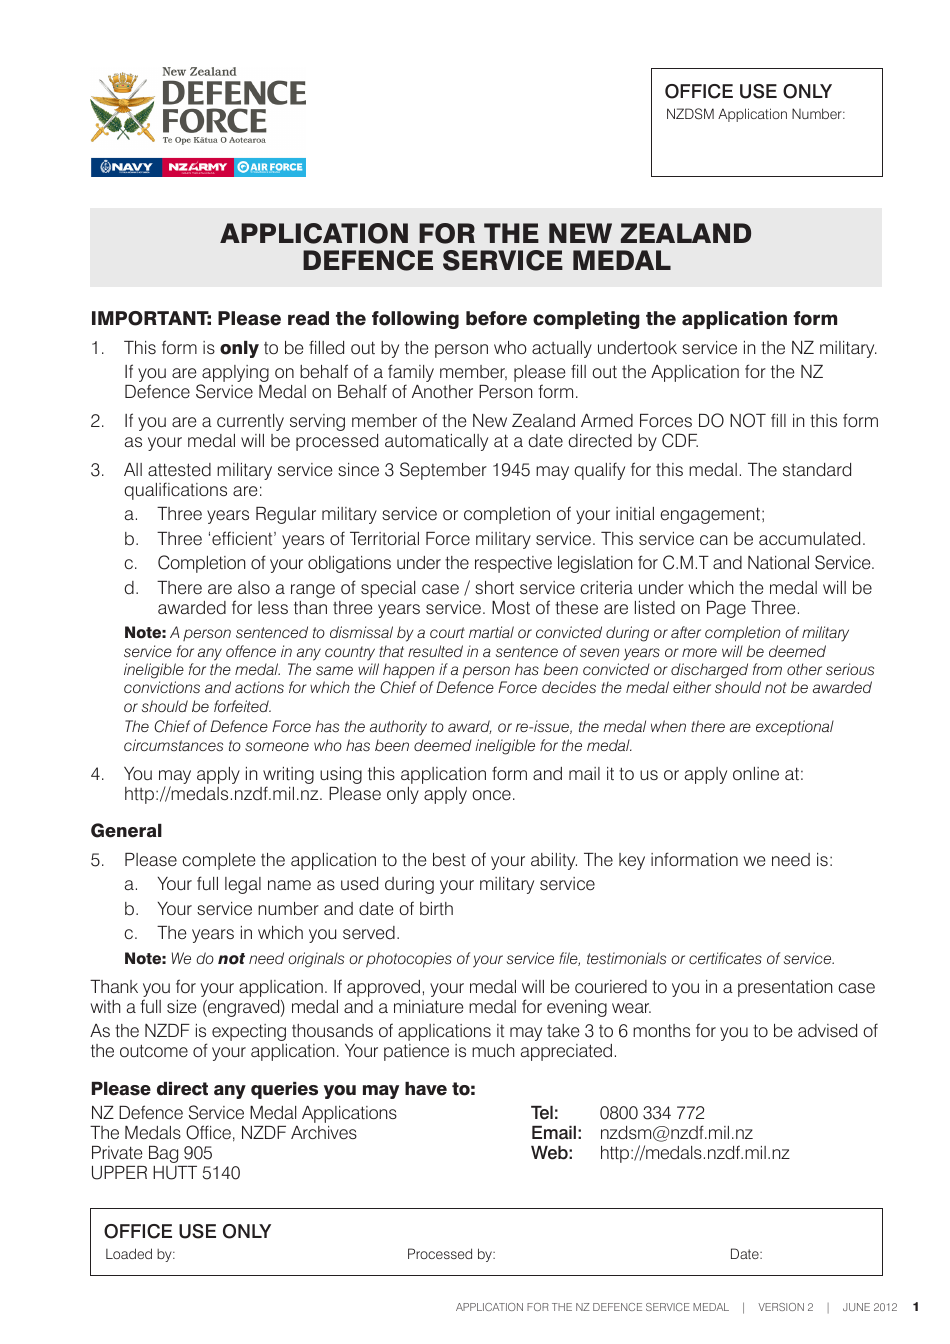 Application Form for the New Zealand Defence Service Medal - New Zealand, Page 1